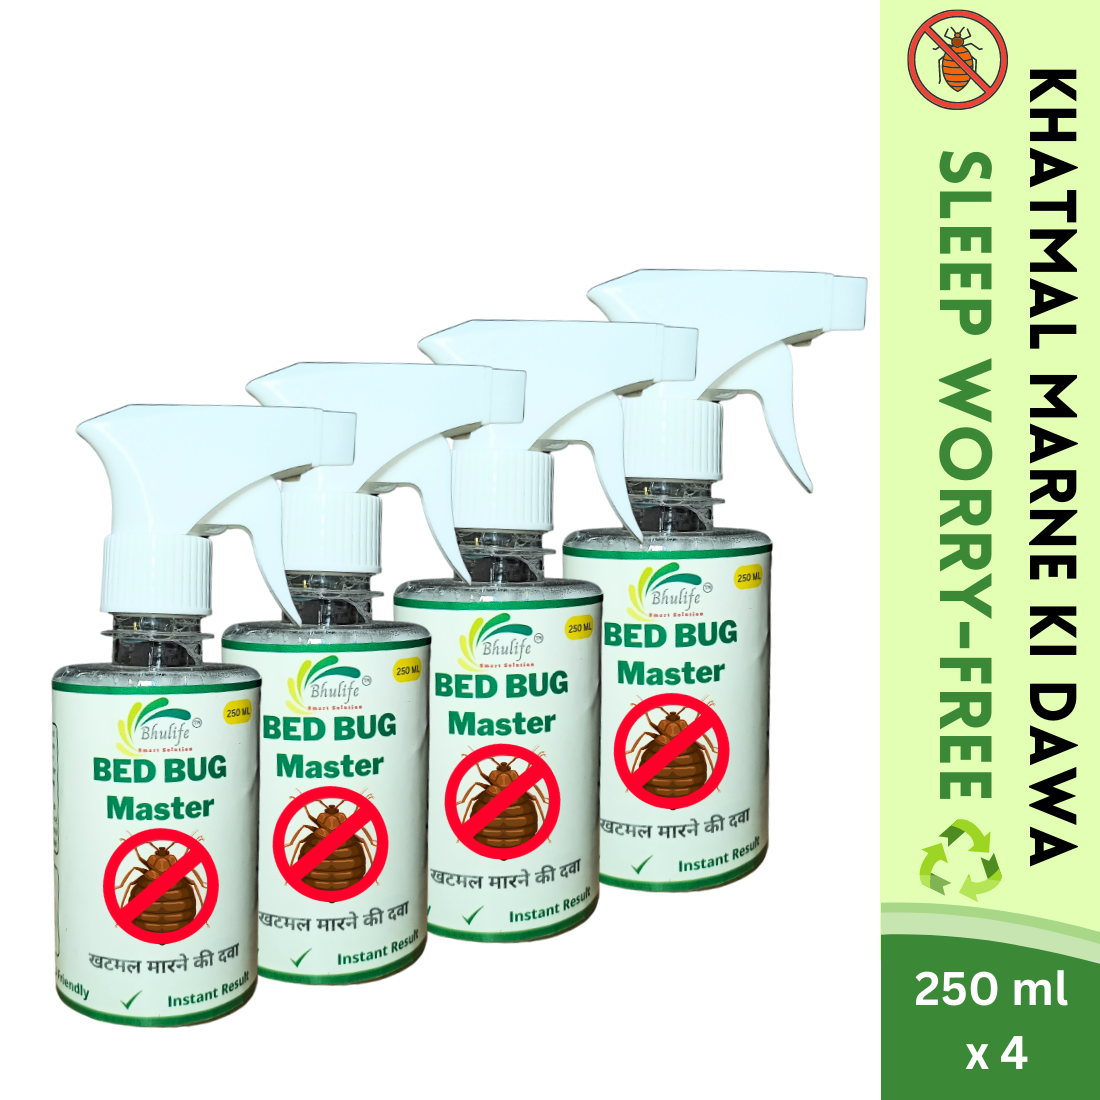 Bhulife Best Bed bugs Spray | How to get rid of bed bugs | bed bug treatment